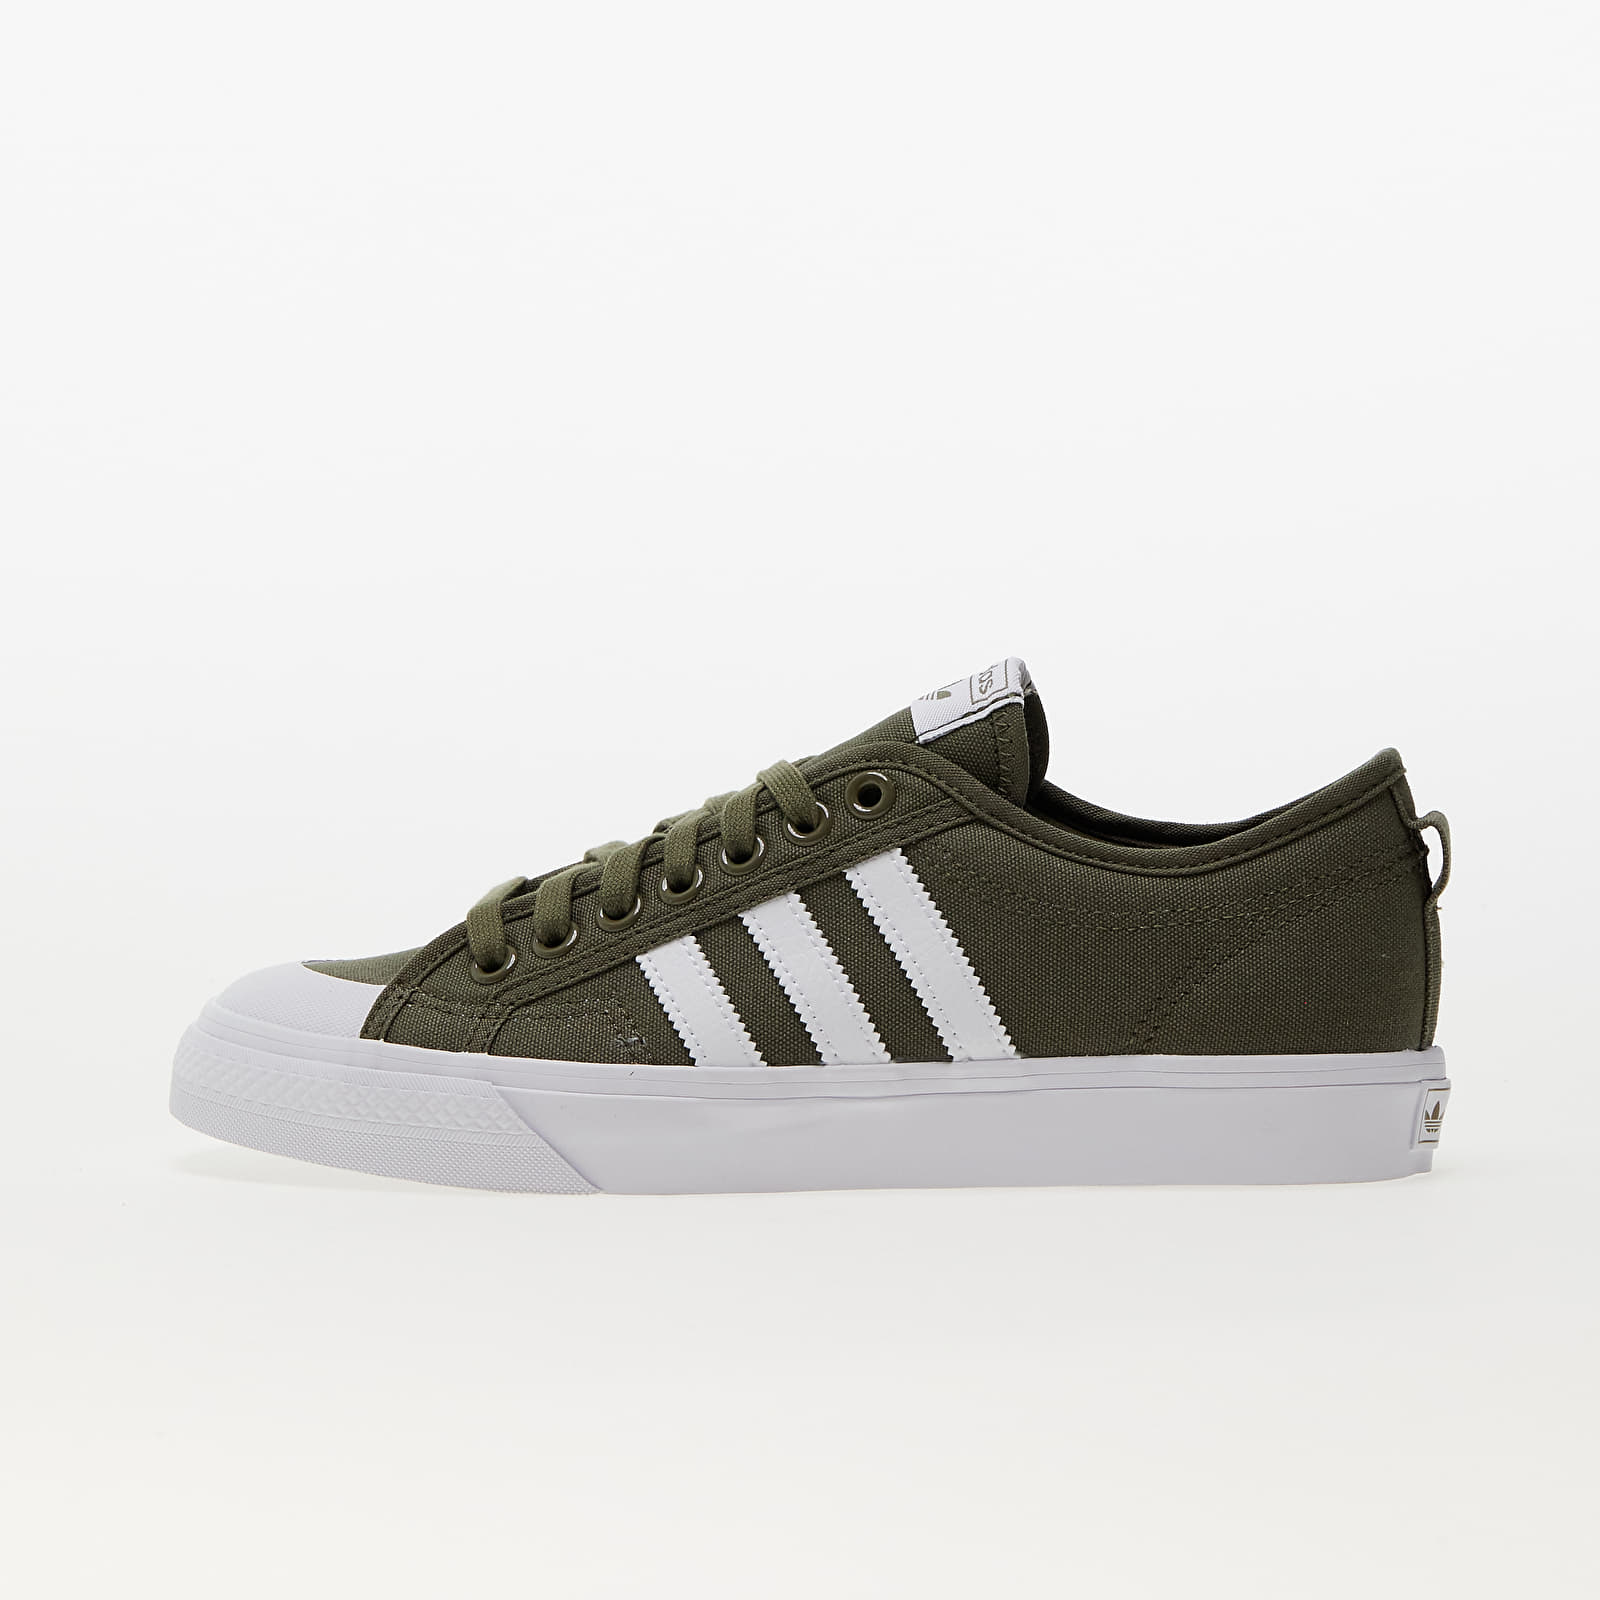 Men's sneakers and shoes adidas Originals Nizza Olive Strata/ Ftw White/ Ftw White